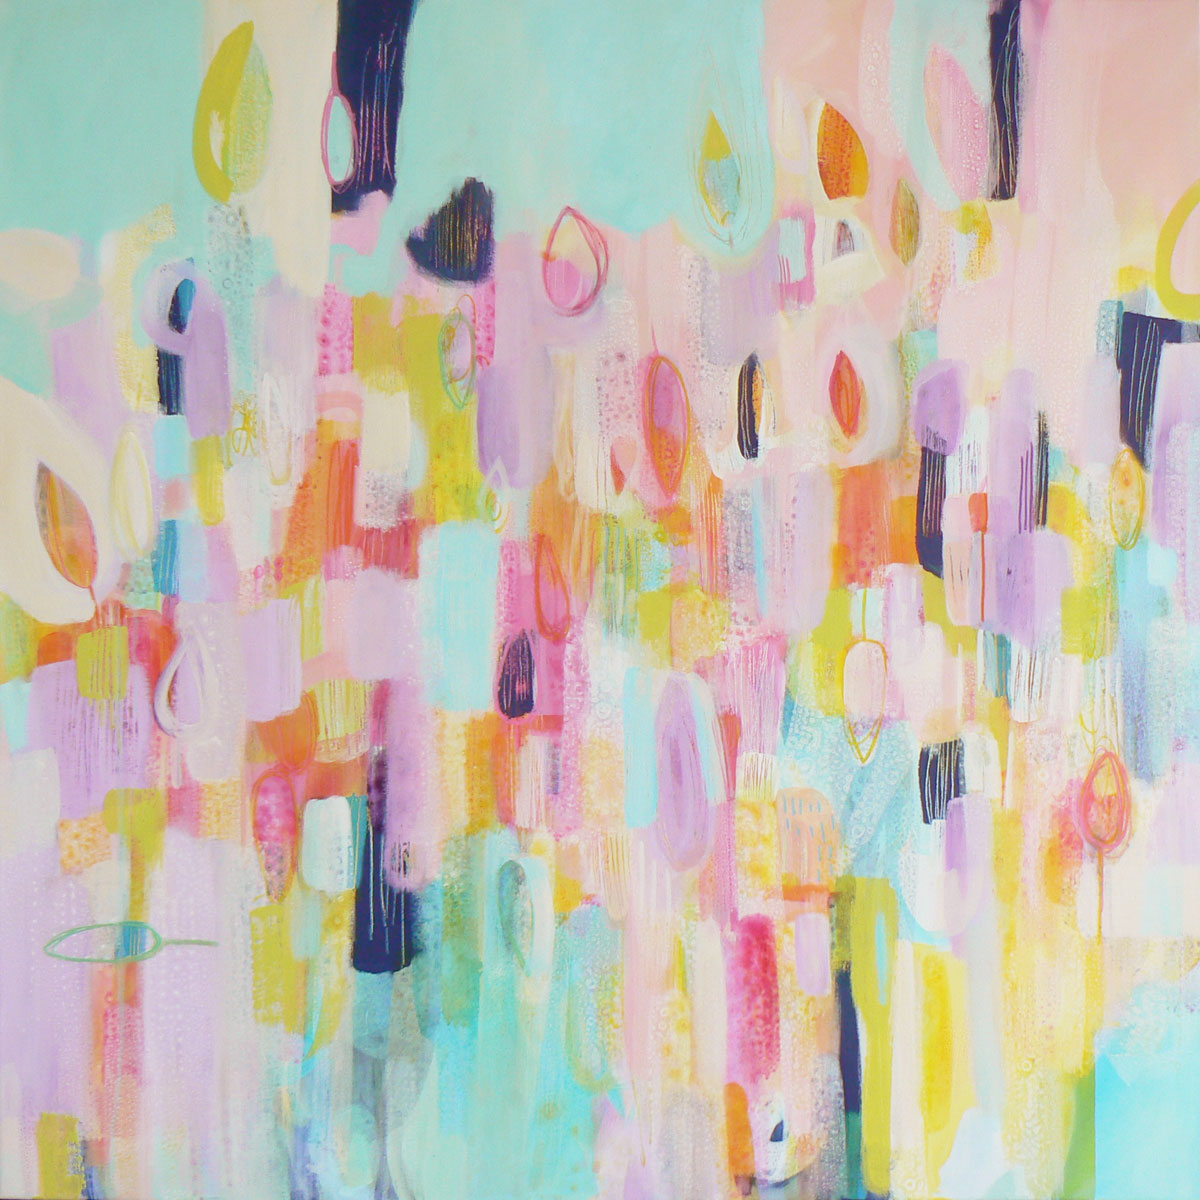 Daydreaming, 2015 Acrylic painting by Carolynne Coulson